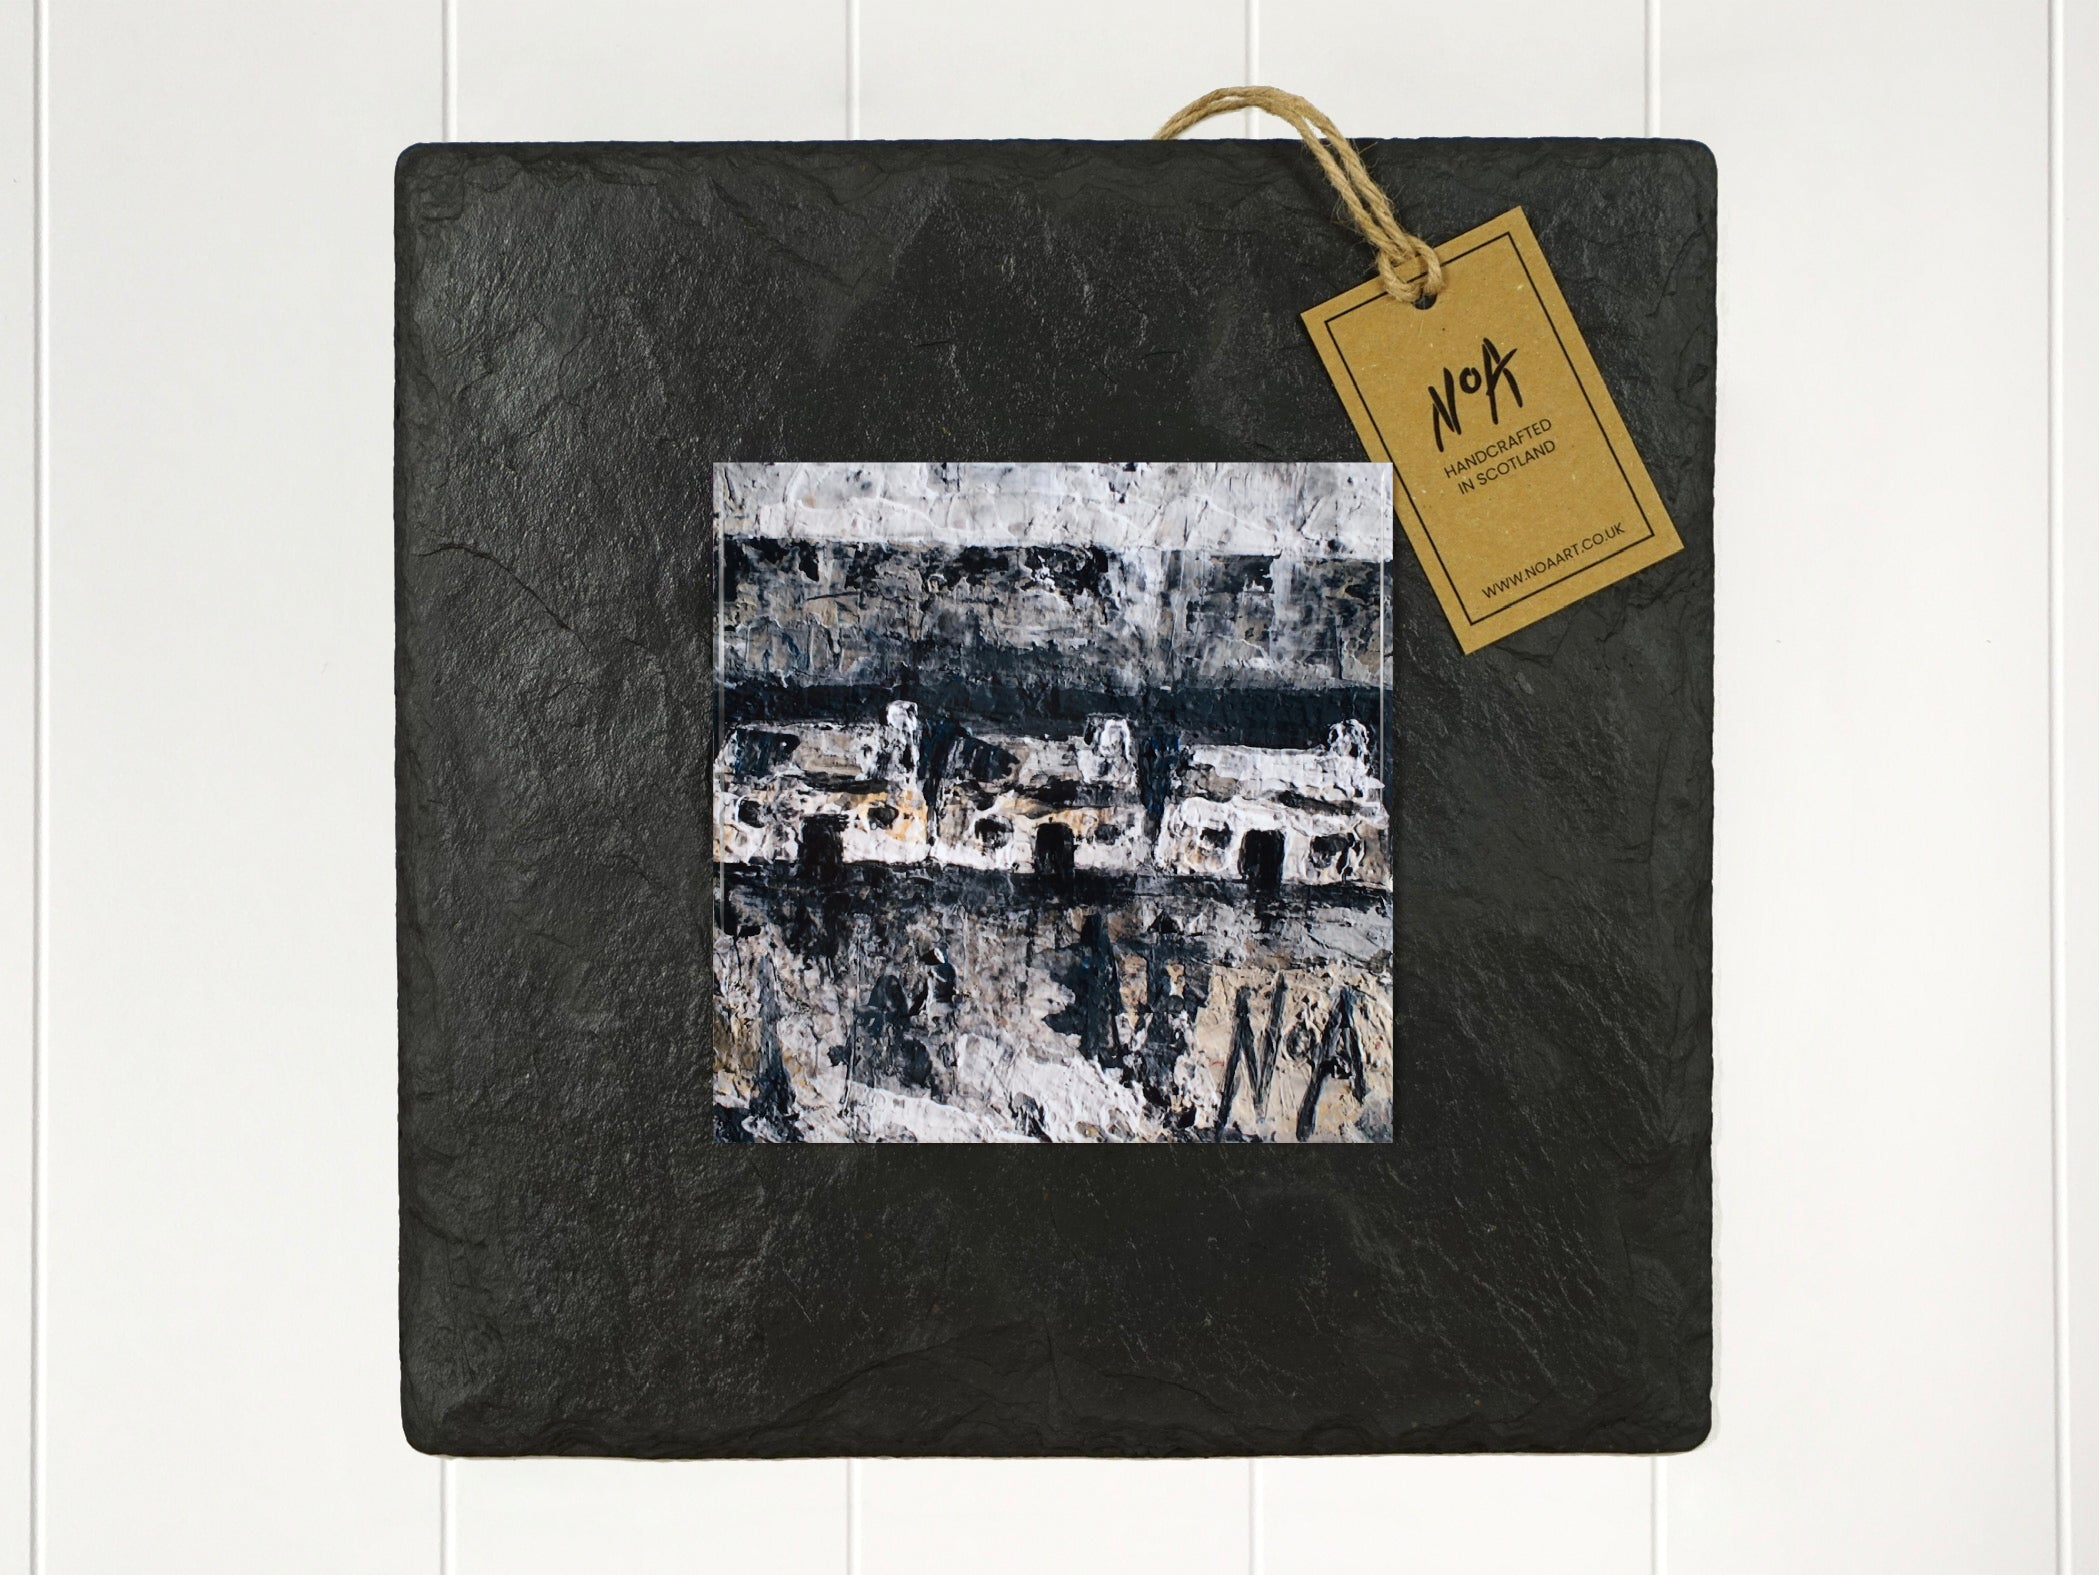  Wall art of three small white cottages in natural and grey done in an abstract style onto a square ceramic tile mounted on square slate